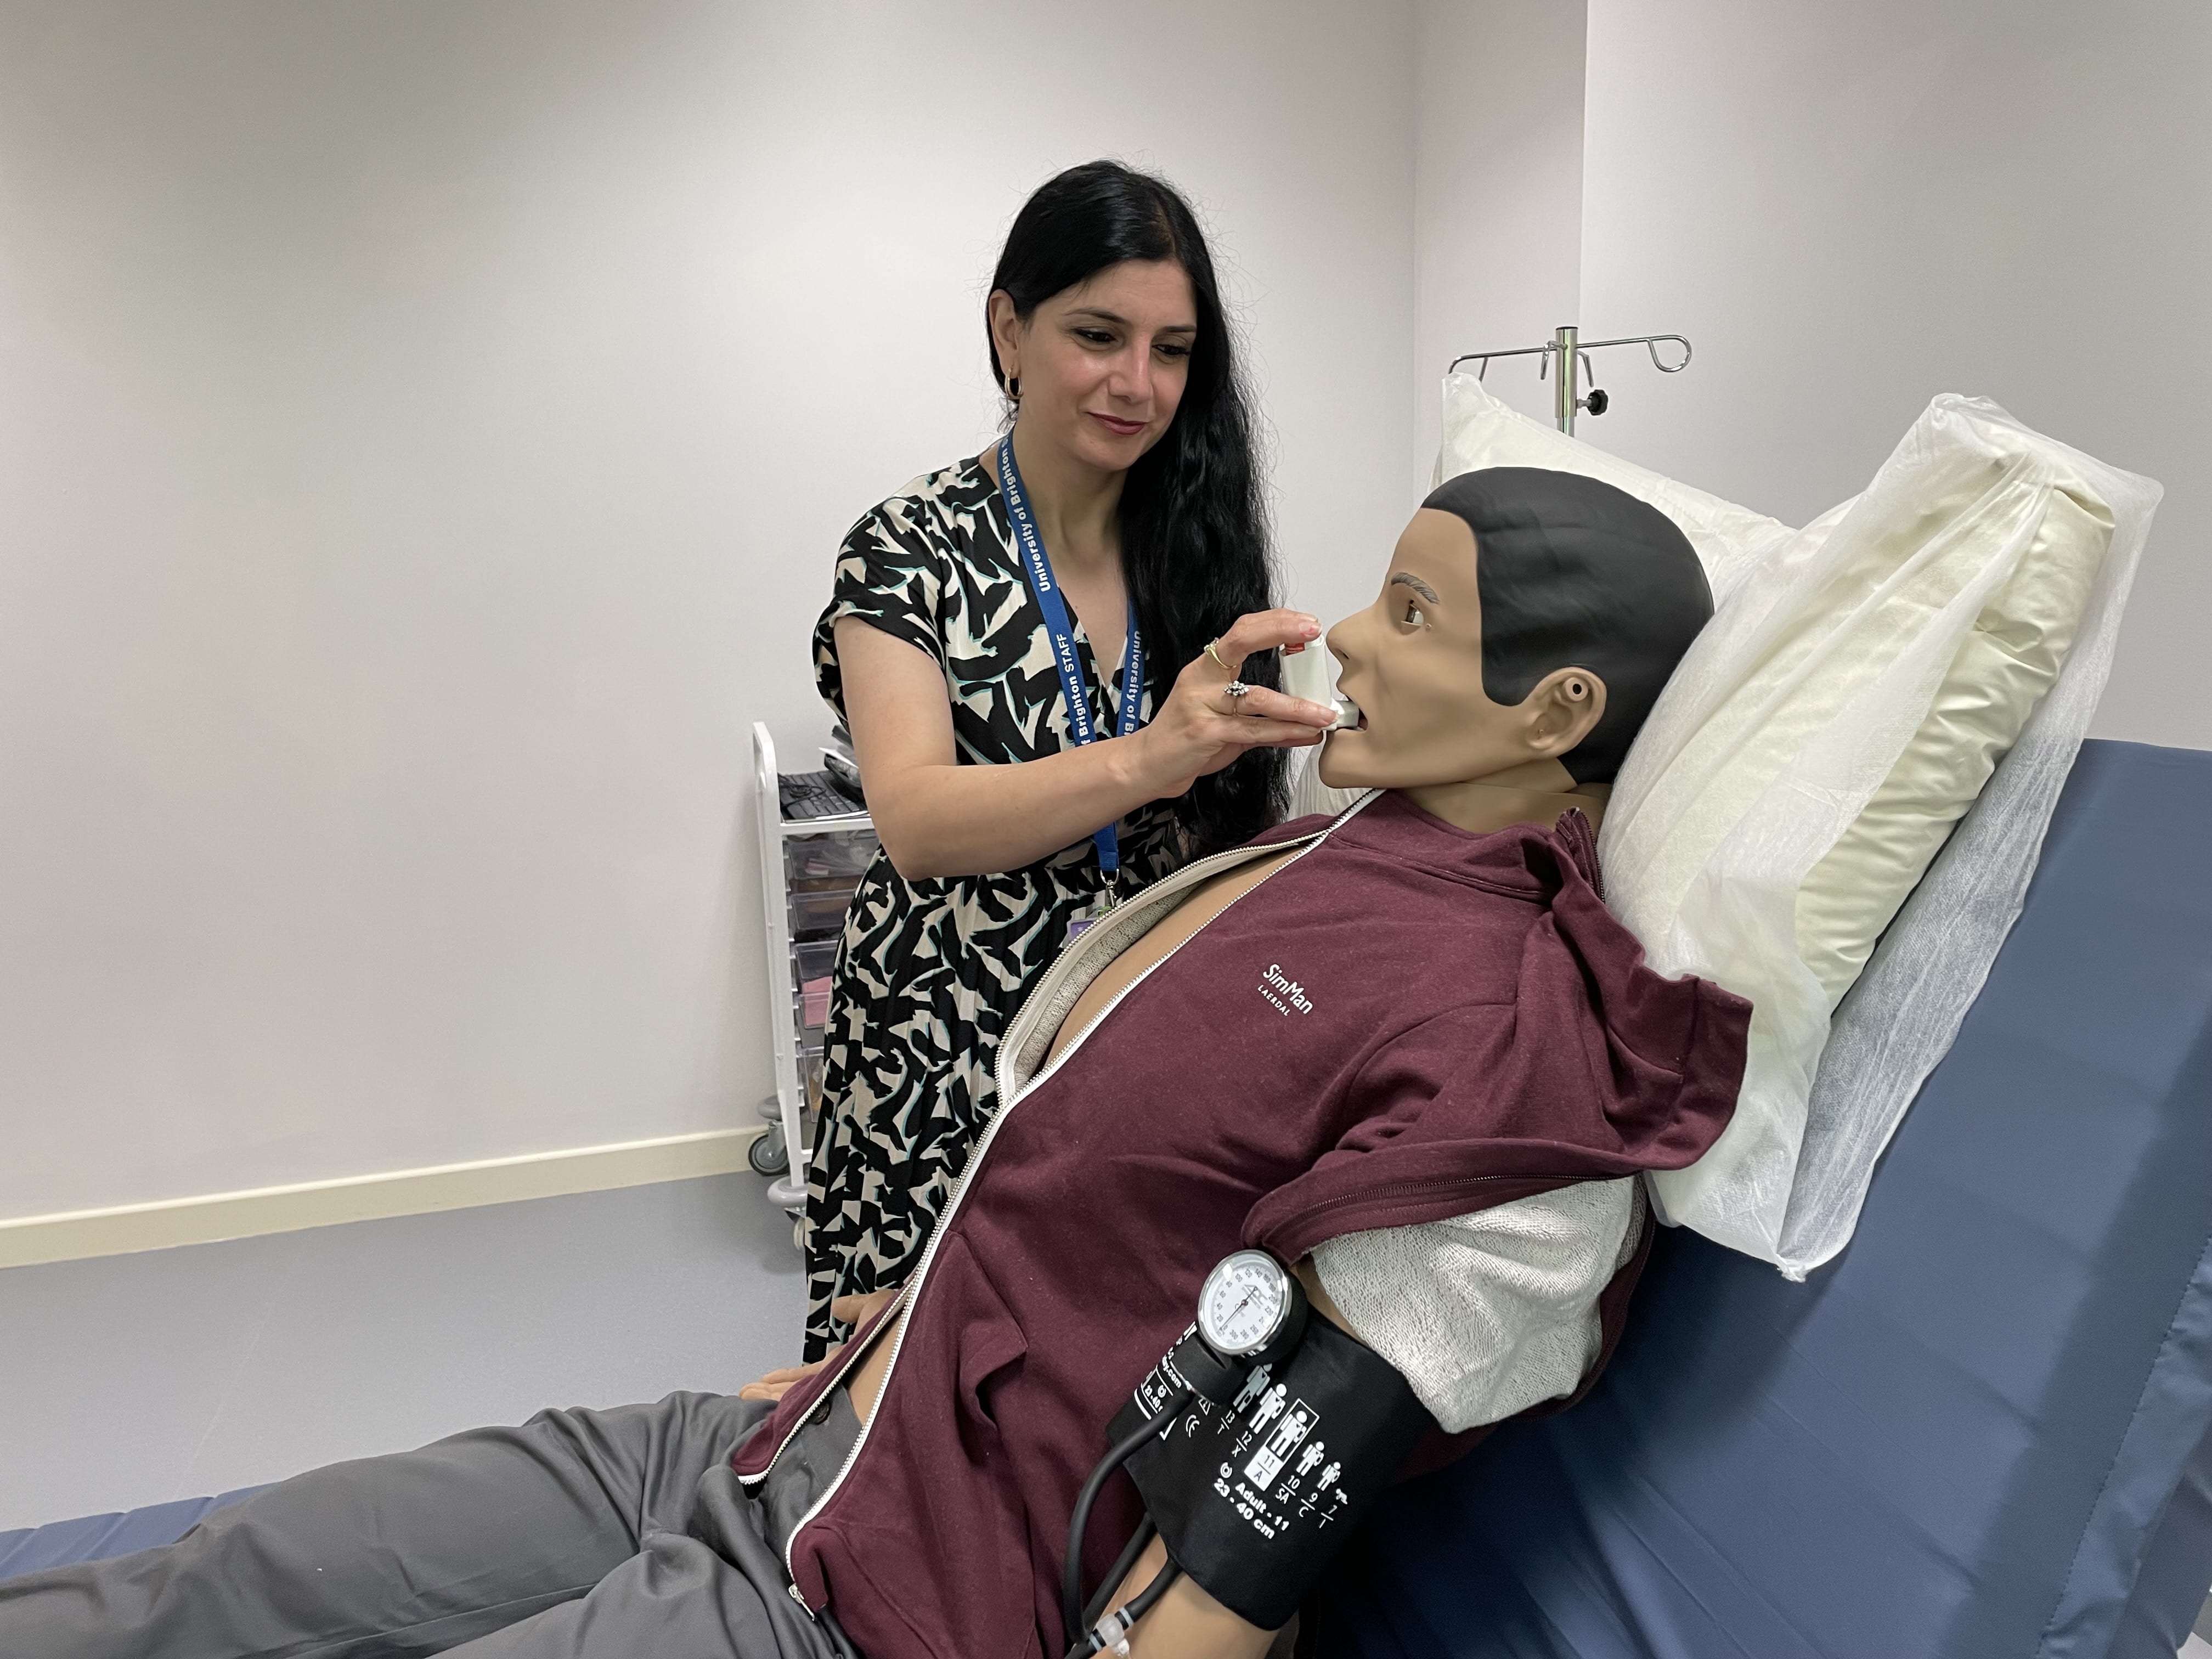 Safoora Azimi-Yancheshmeh administers asthma medication to one of the 'Sim' people